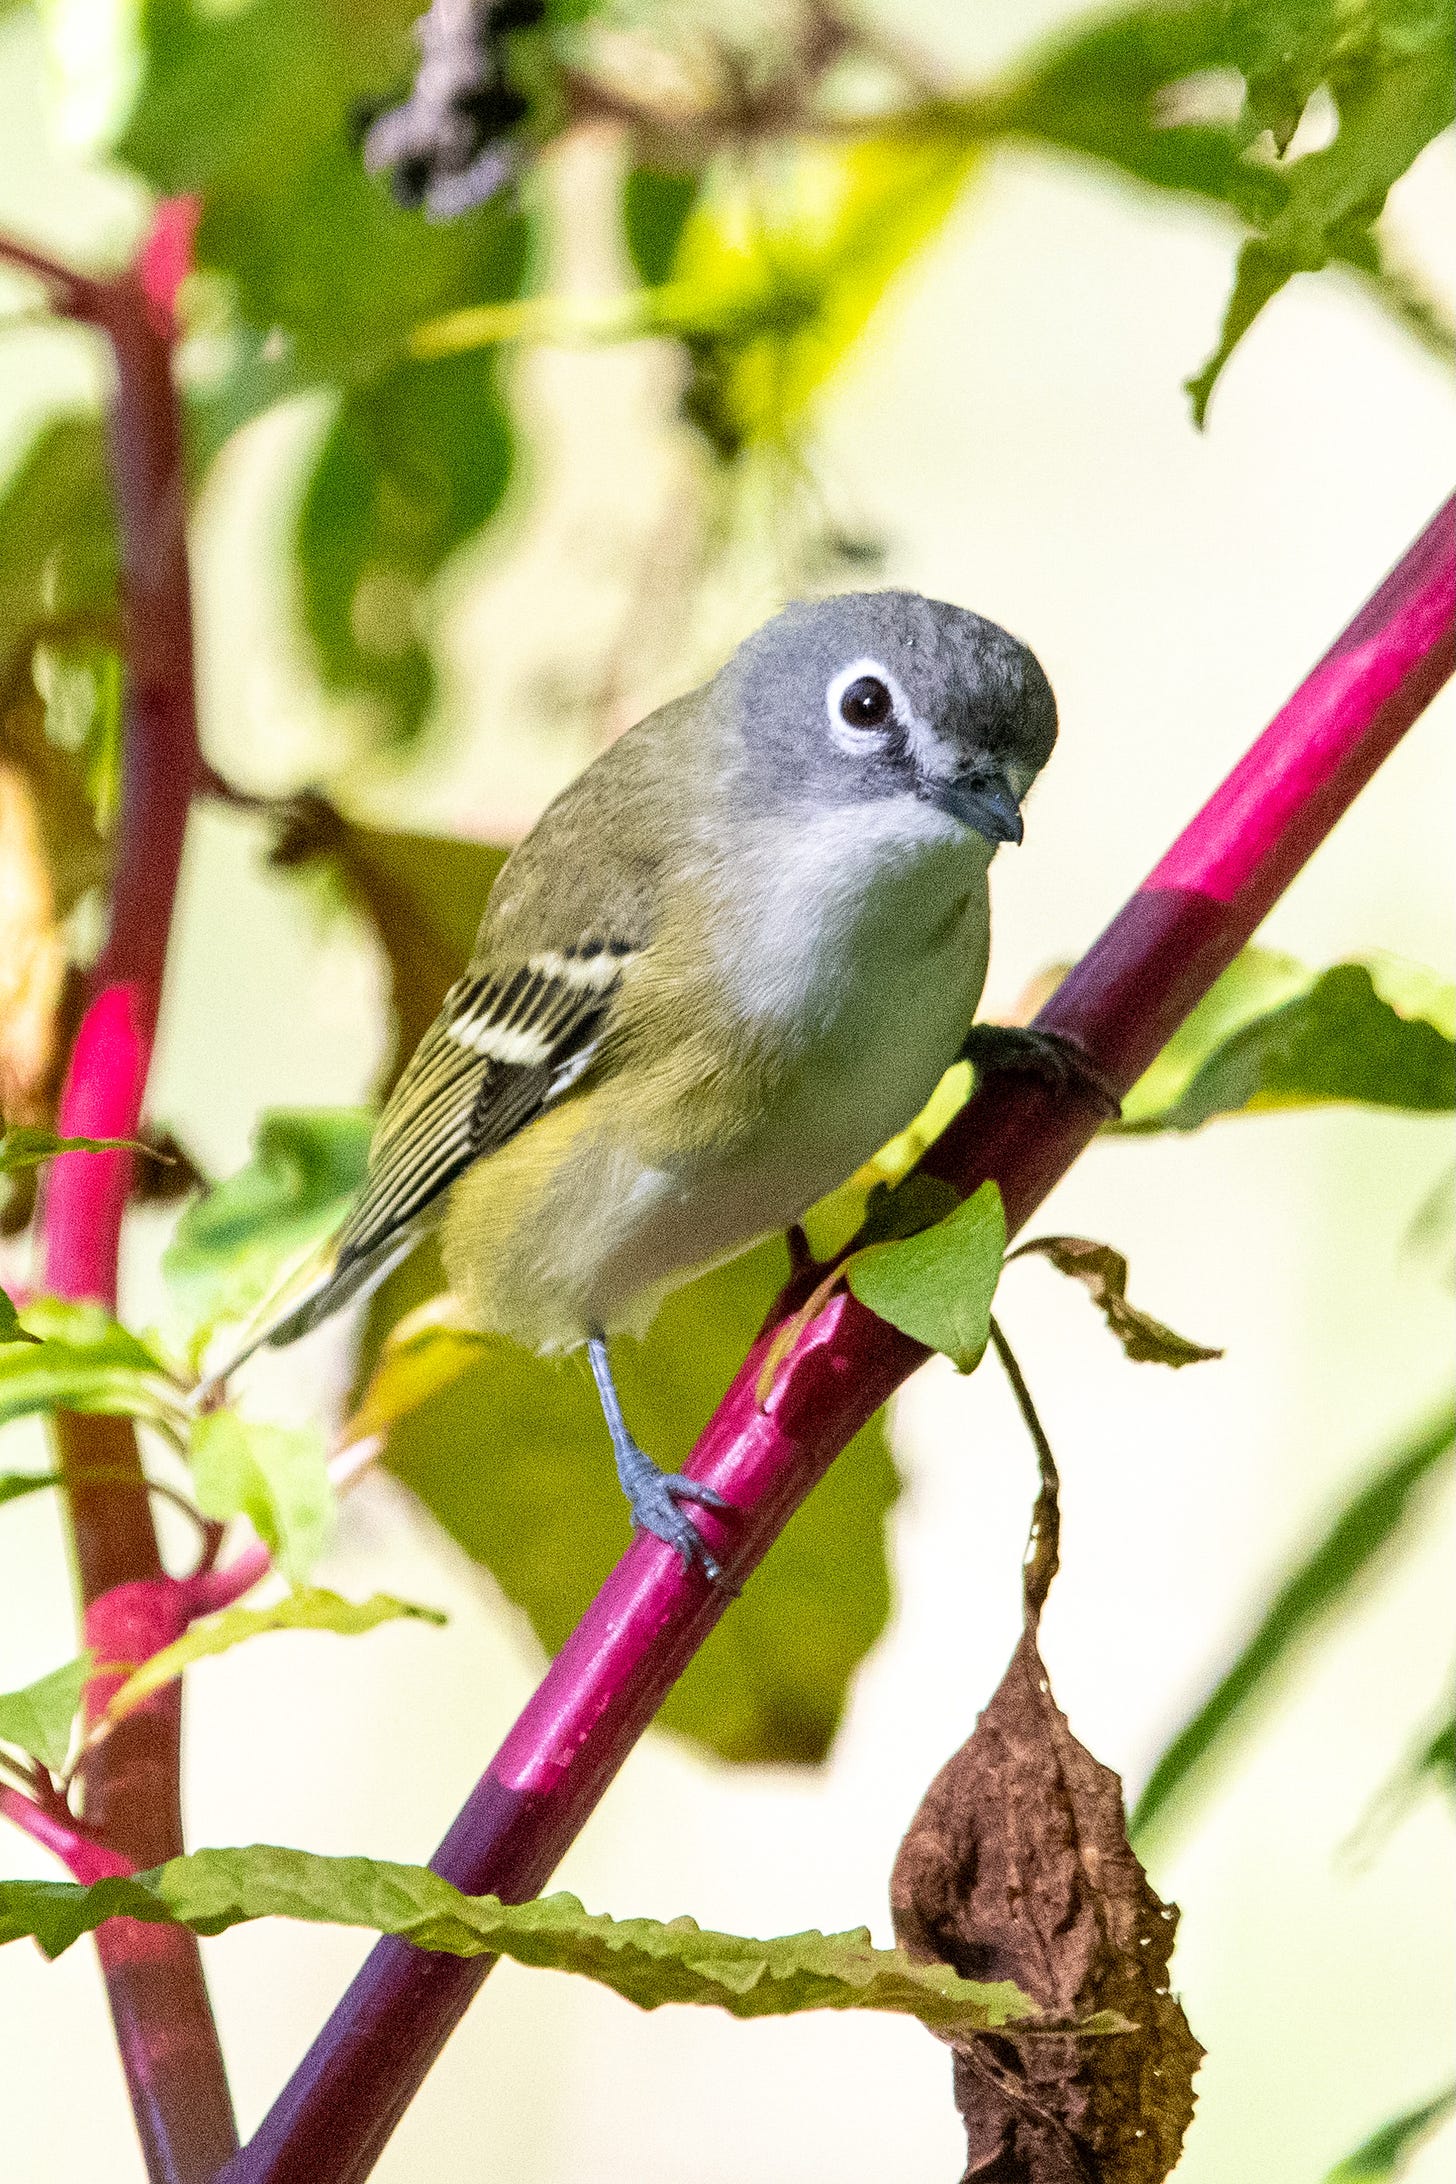 A blue-headed vireo eyes the camera from a diagonal perch on a bright red pokeweed stem